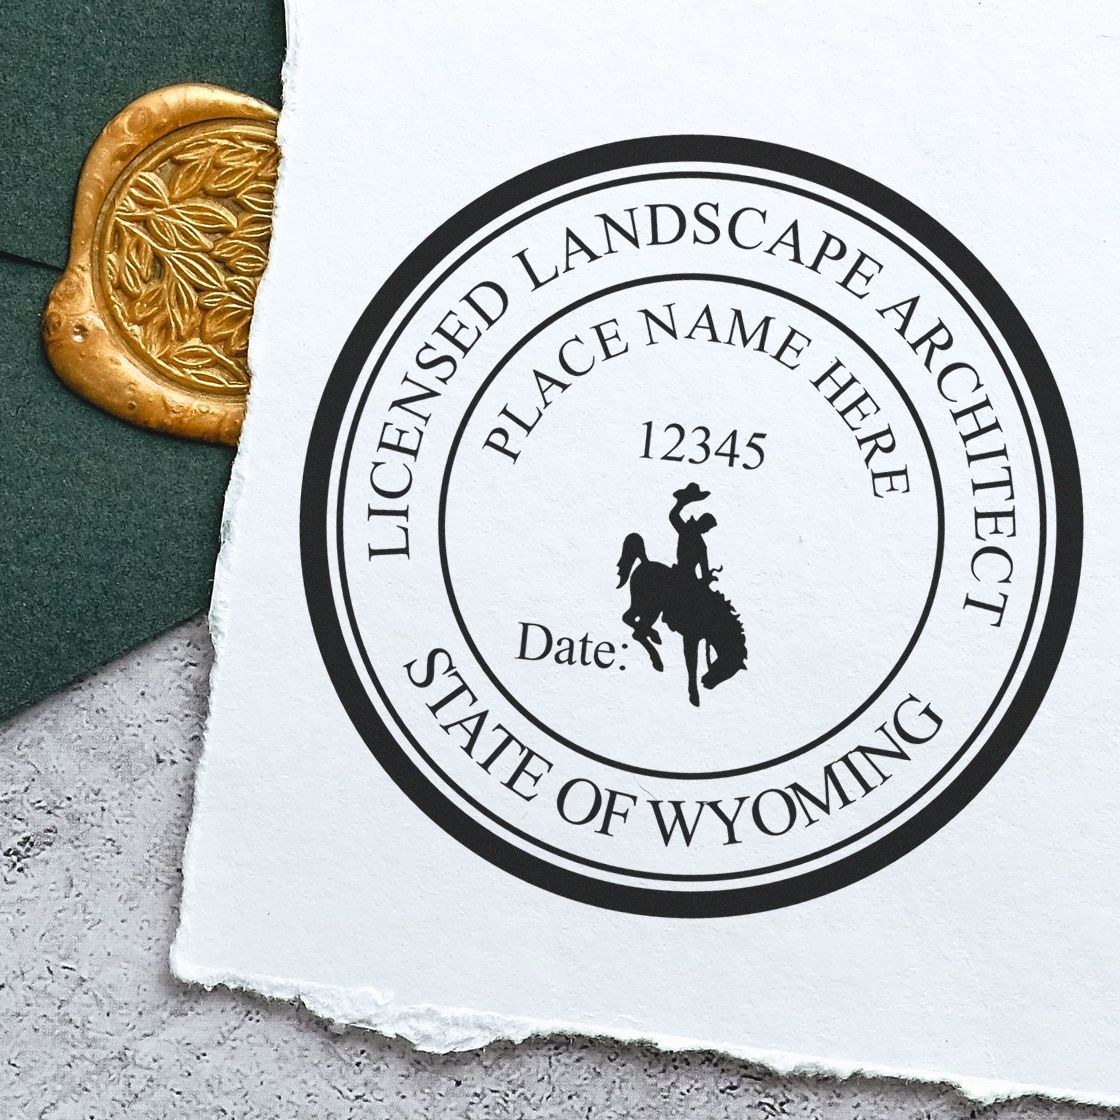 A stamped impression of the Digital Wyoming Landscape Architect Stamp in this stylish lifestyle photo, setting the tone for a unique and personalized product.